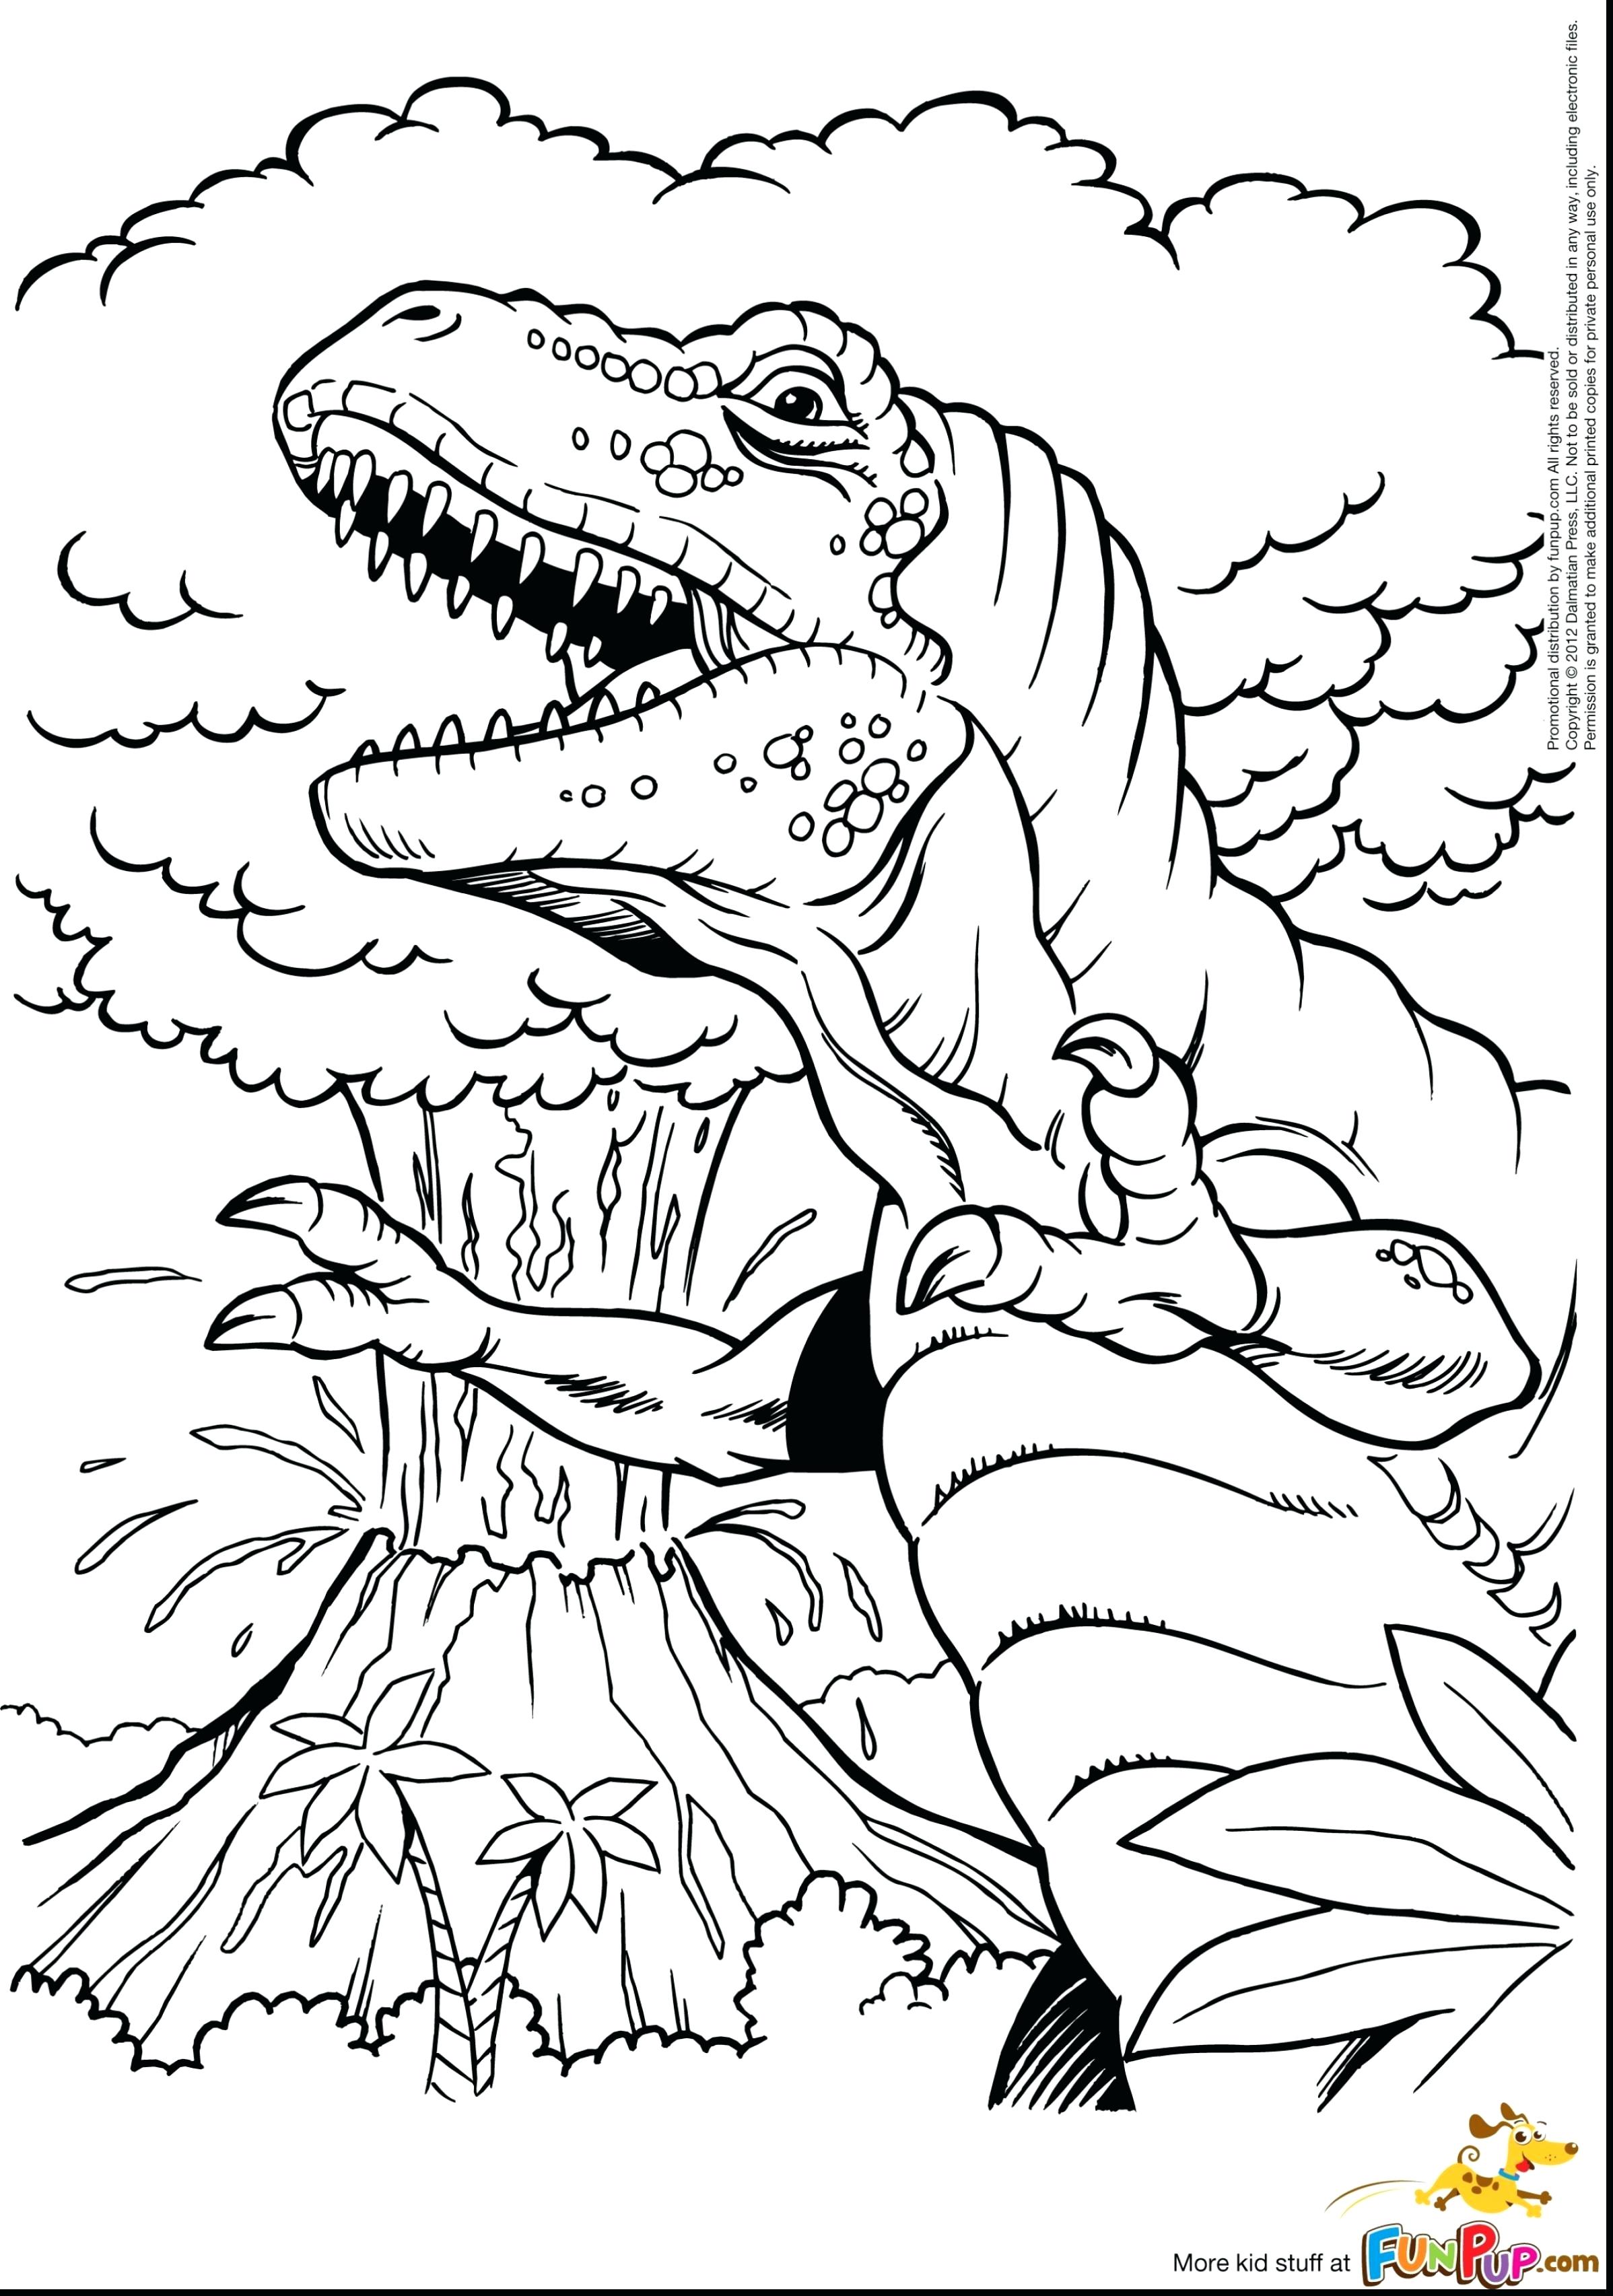 T Rex Dinosaur Coloring Pages At GetColorings Free Printable